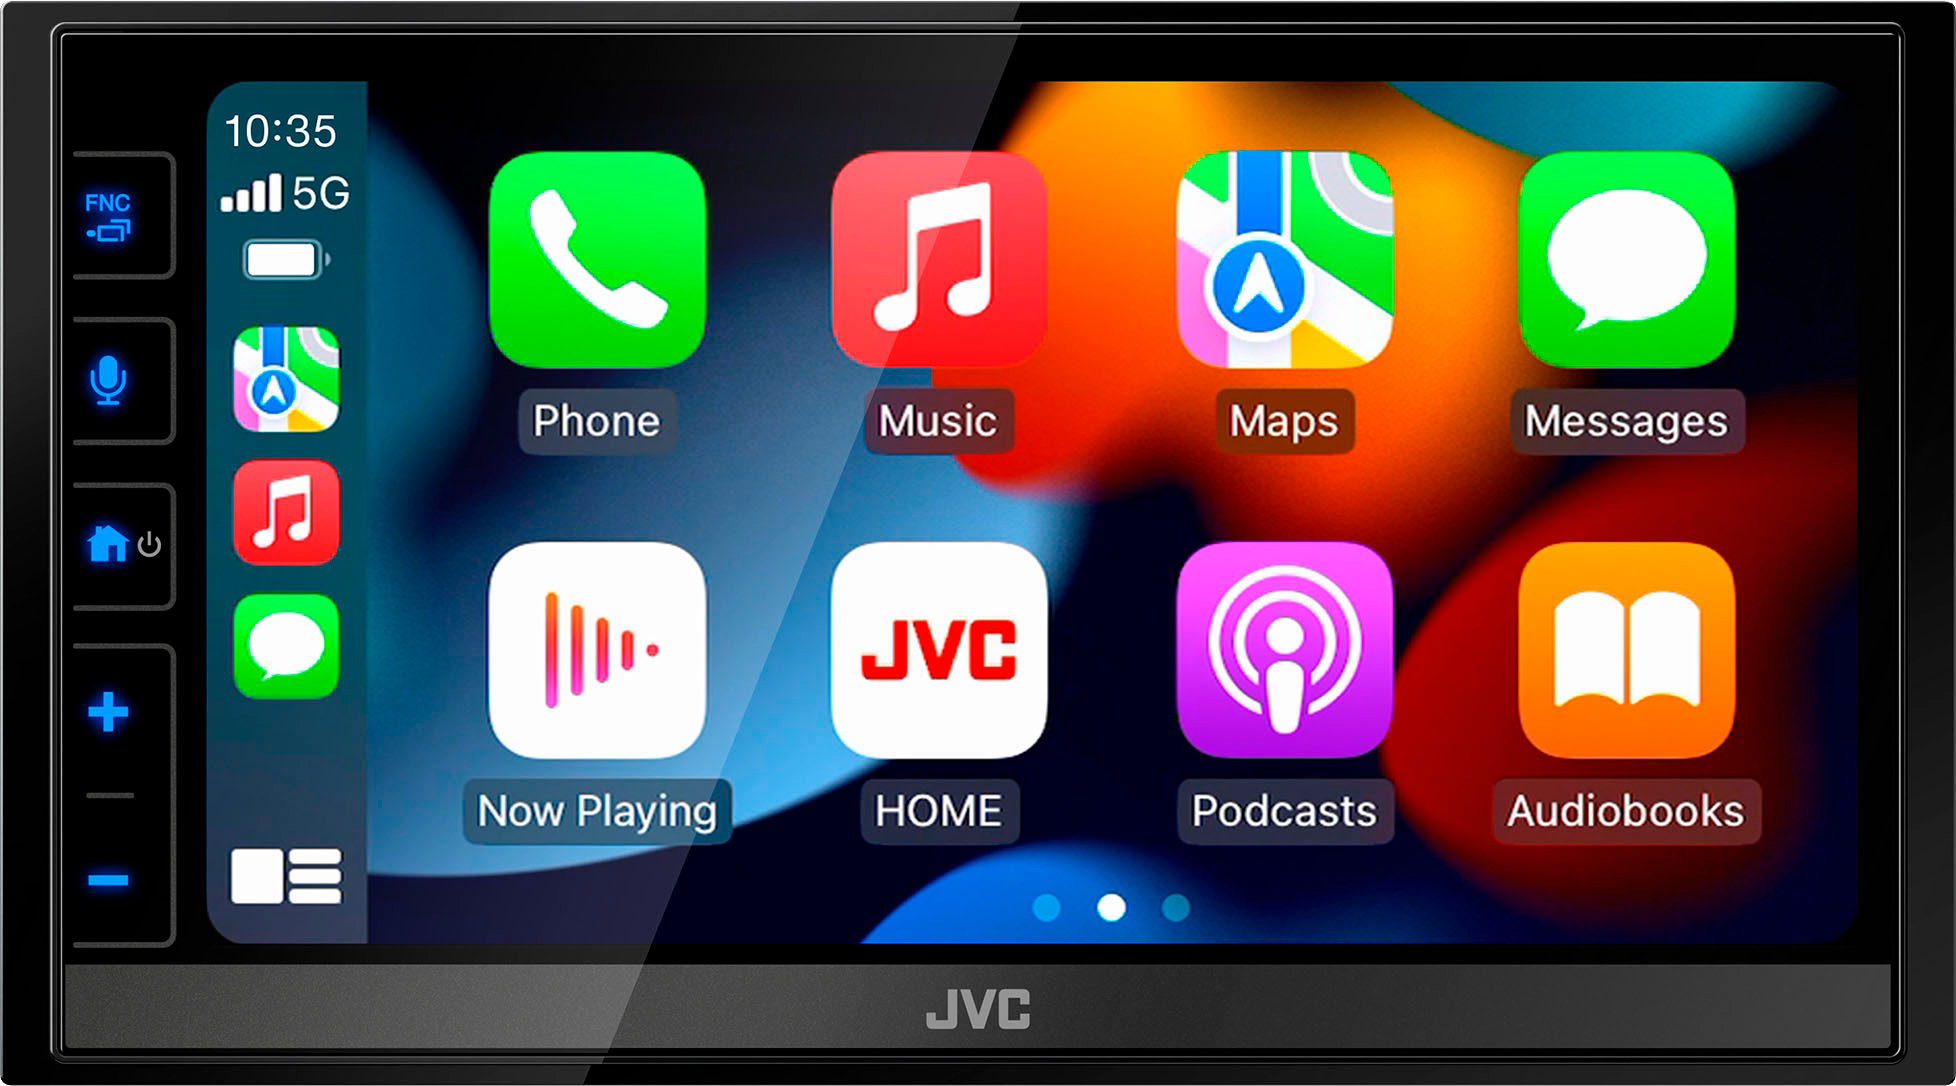 How to Use Wireless Apple CarPlay & Android Auto in GM Vehicles